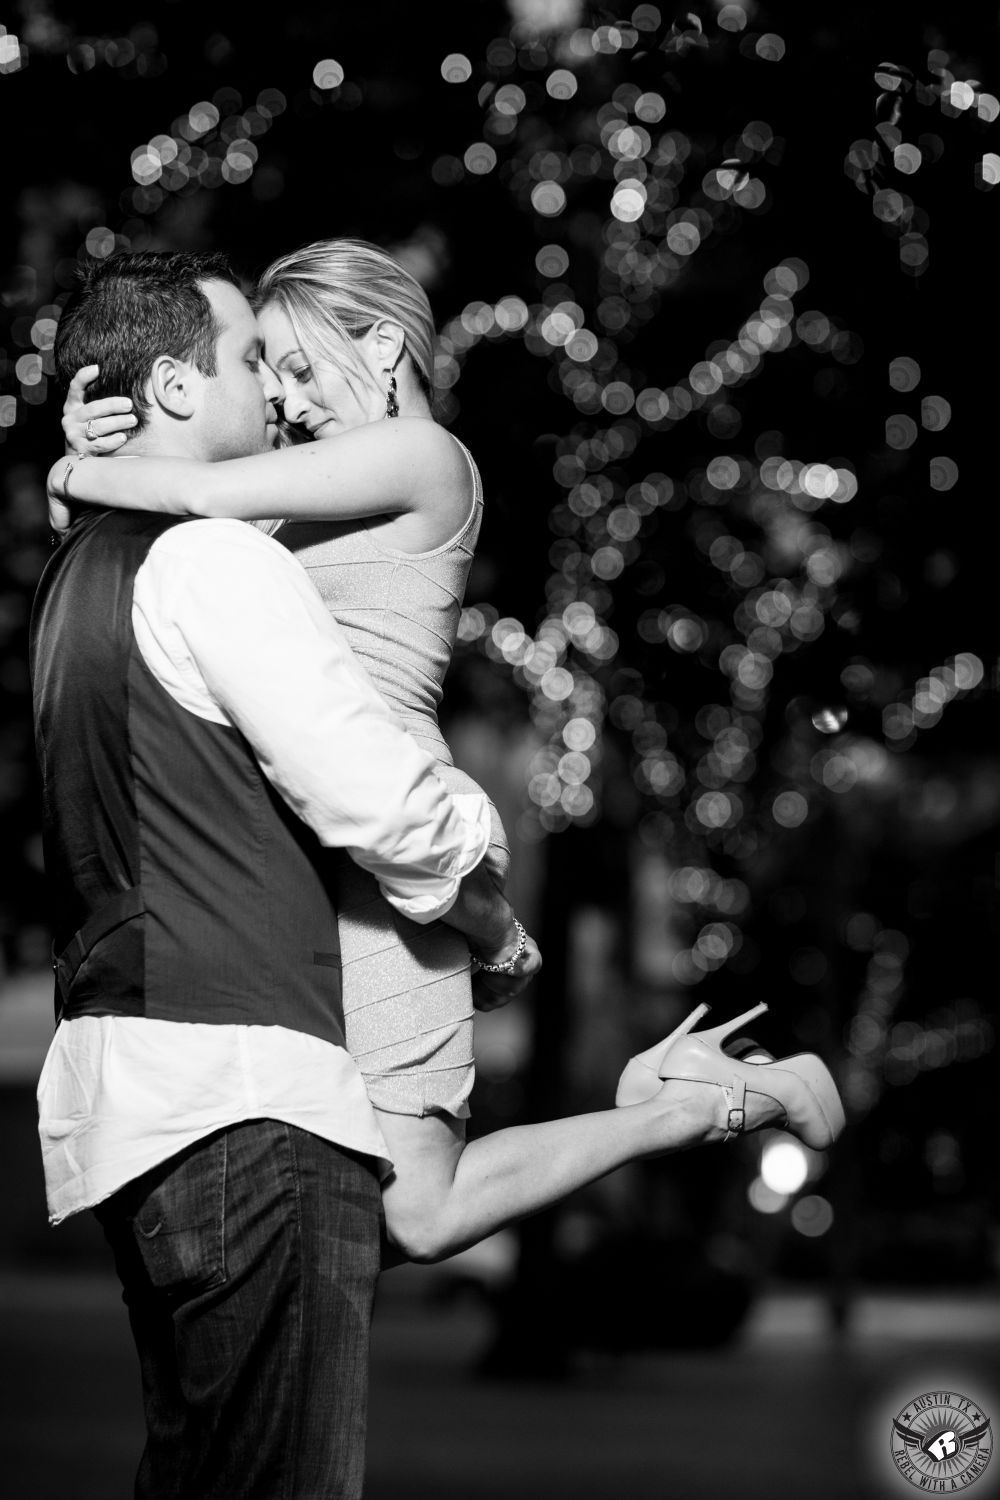 hot engagement couple embrace in front of tree with holiday lights with bokeh in background.  bride is wearing a light tight short dress  and groom is wearing an untucked white shirt with a dark vest.  she has jumped into his arms and they are hugging